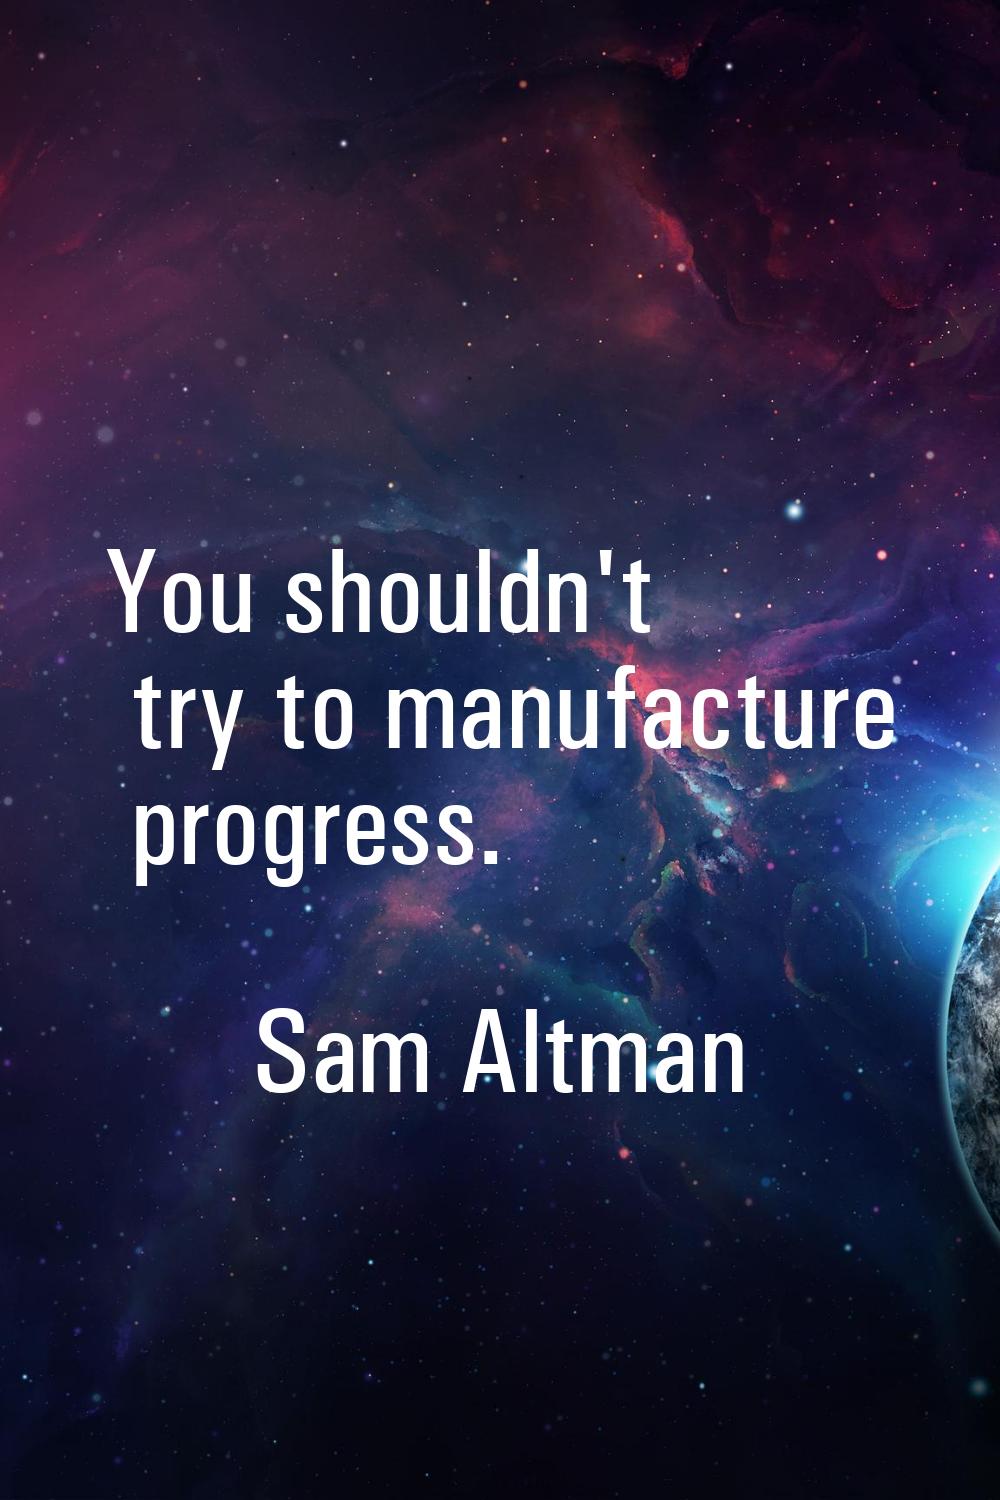 You shouldn't try to manufacture progress.